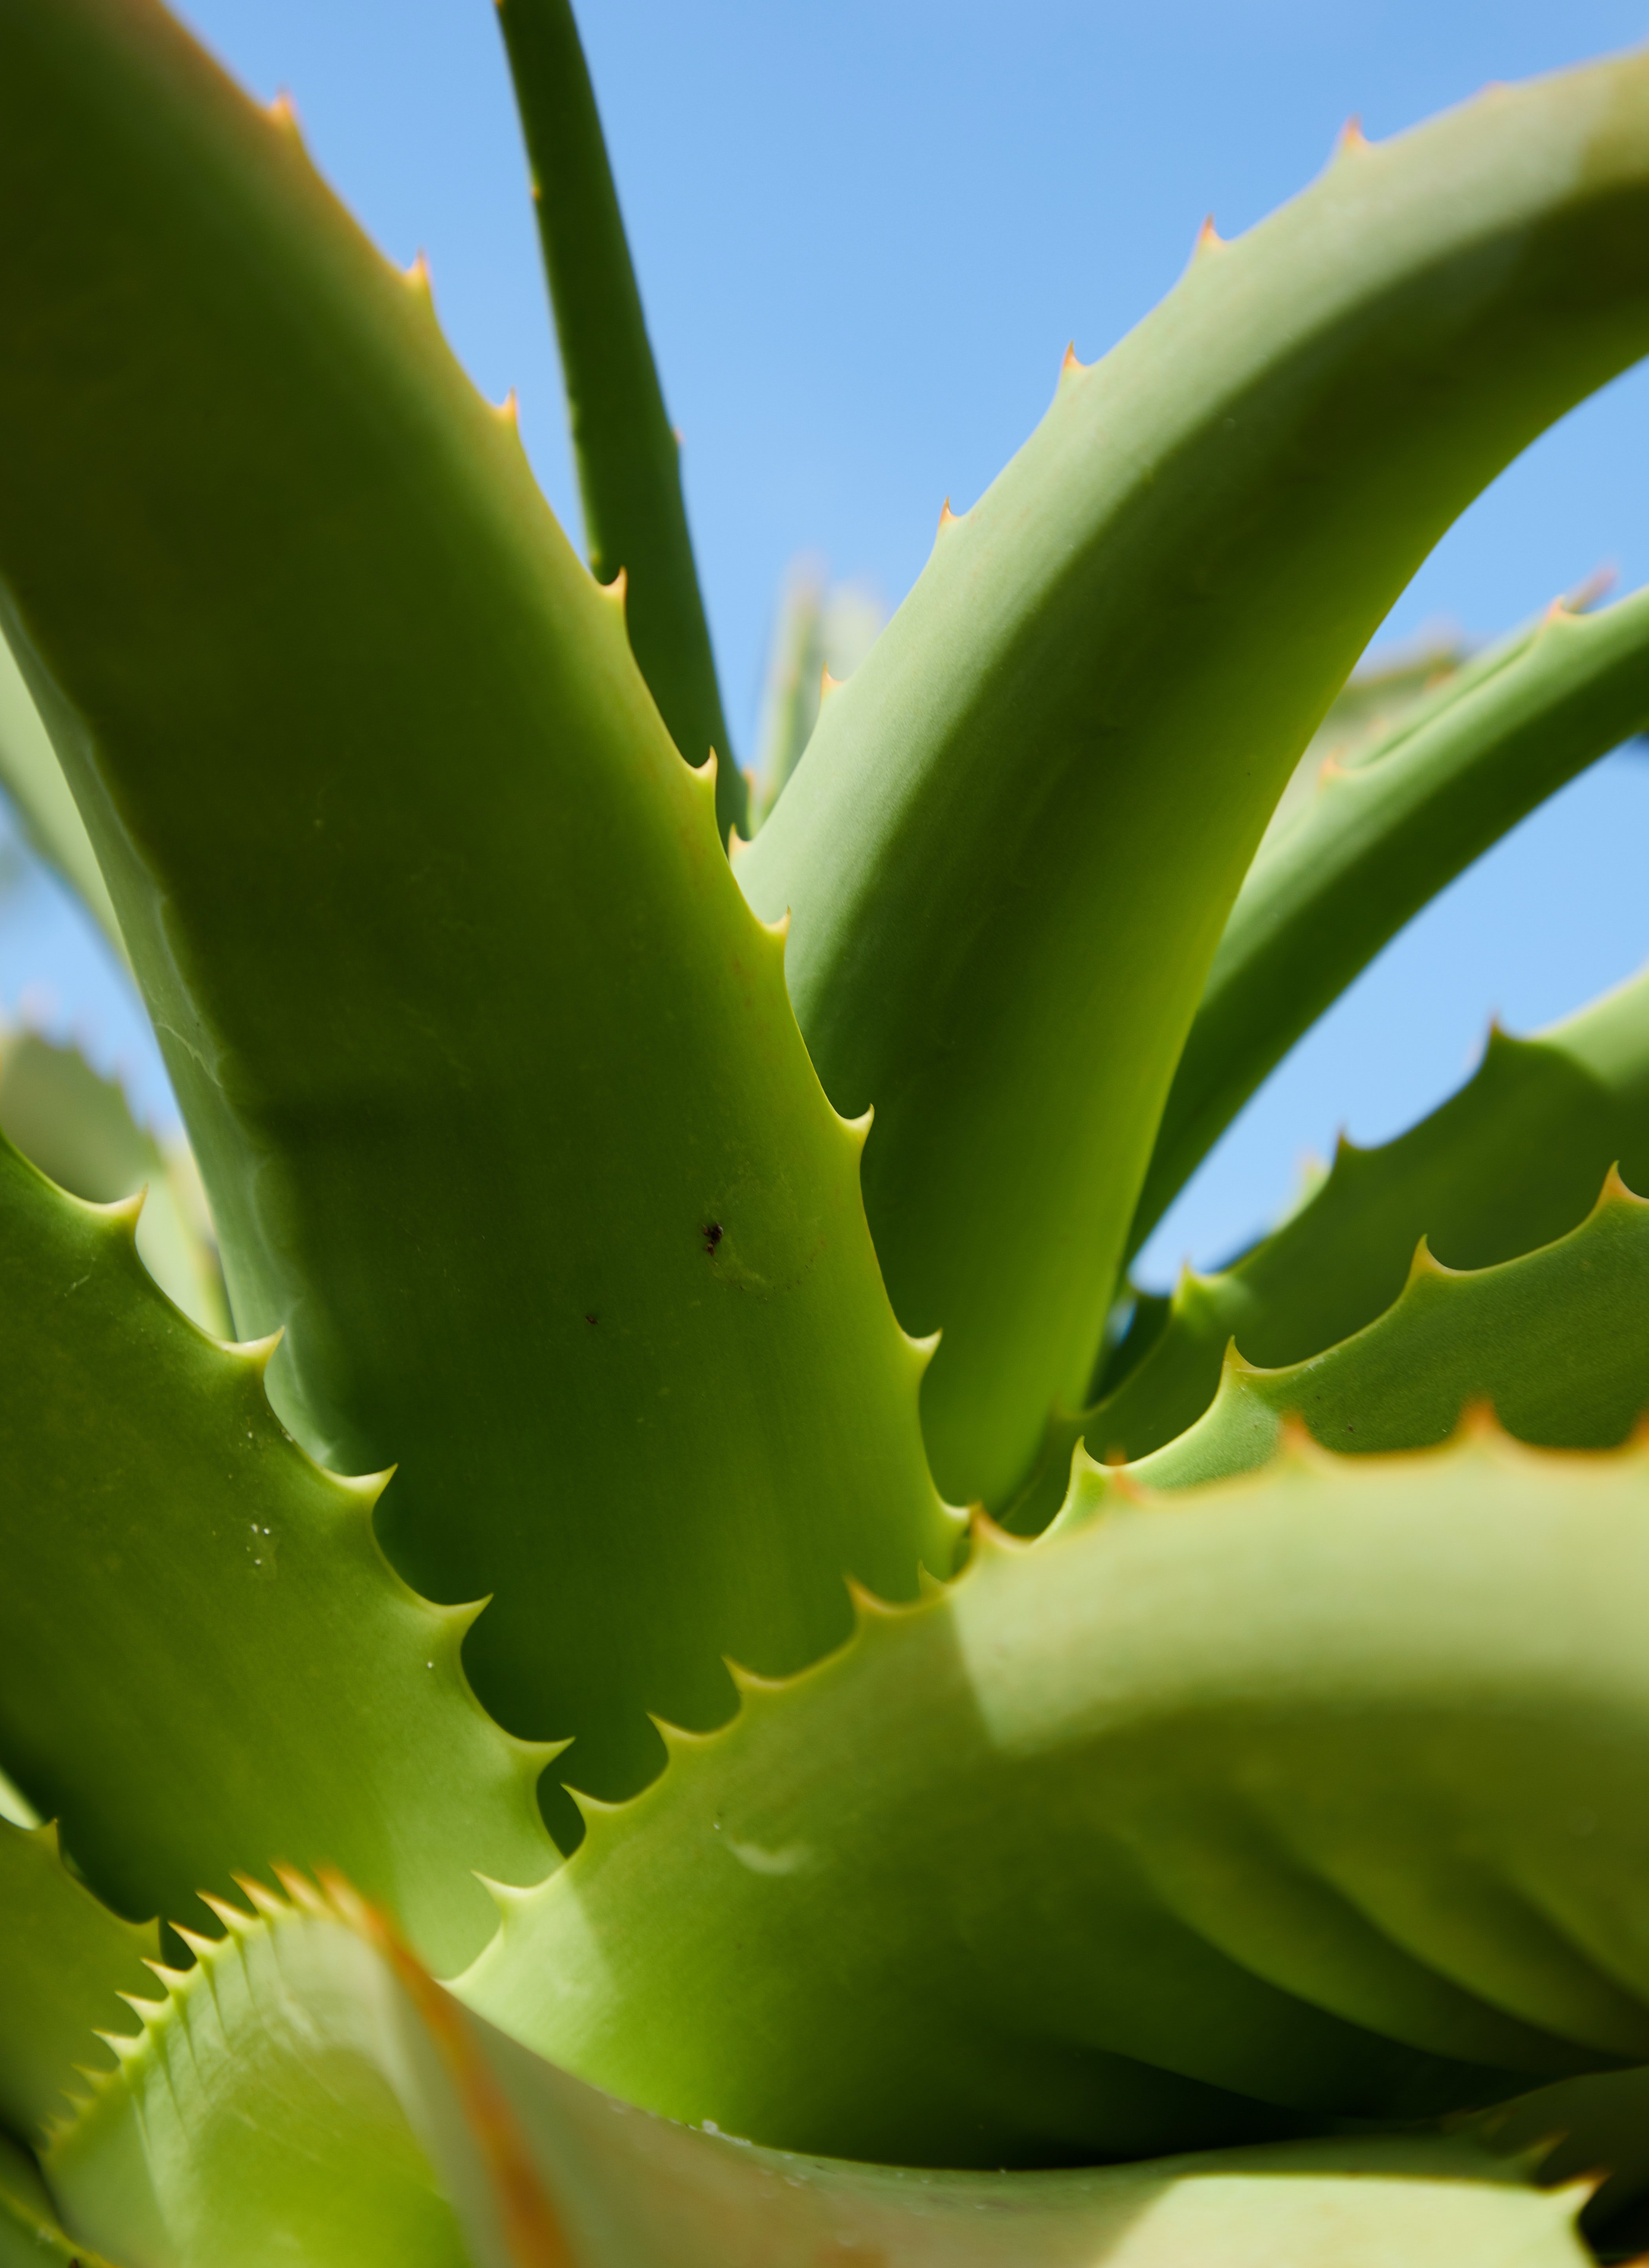 Pictured - A photo of prickly leaves of a succulent plant | Source: Pexels 